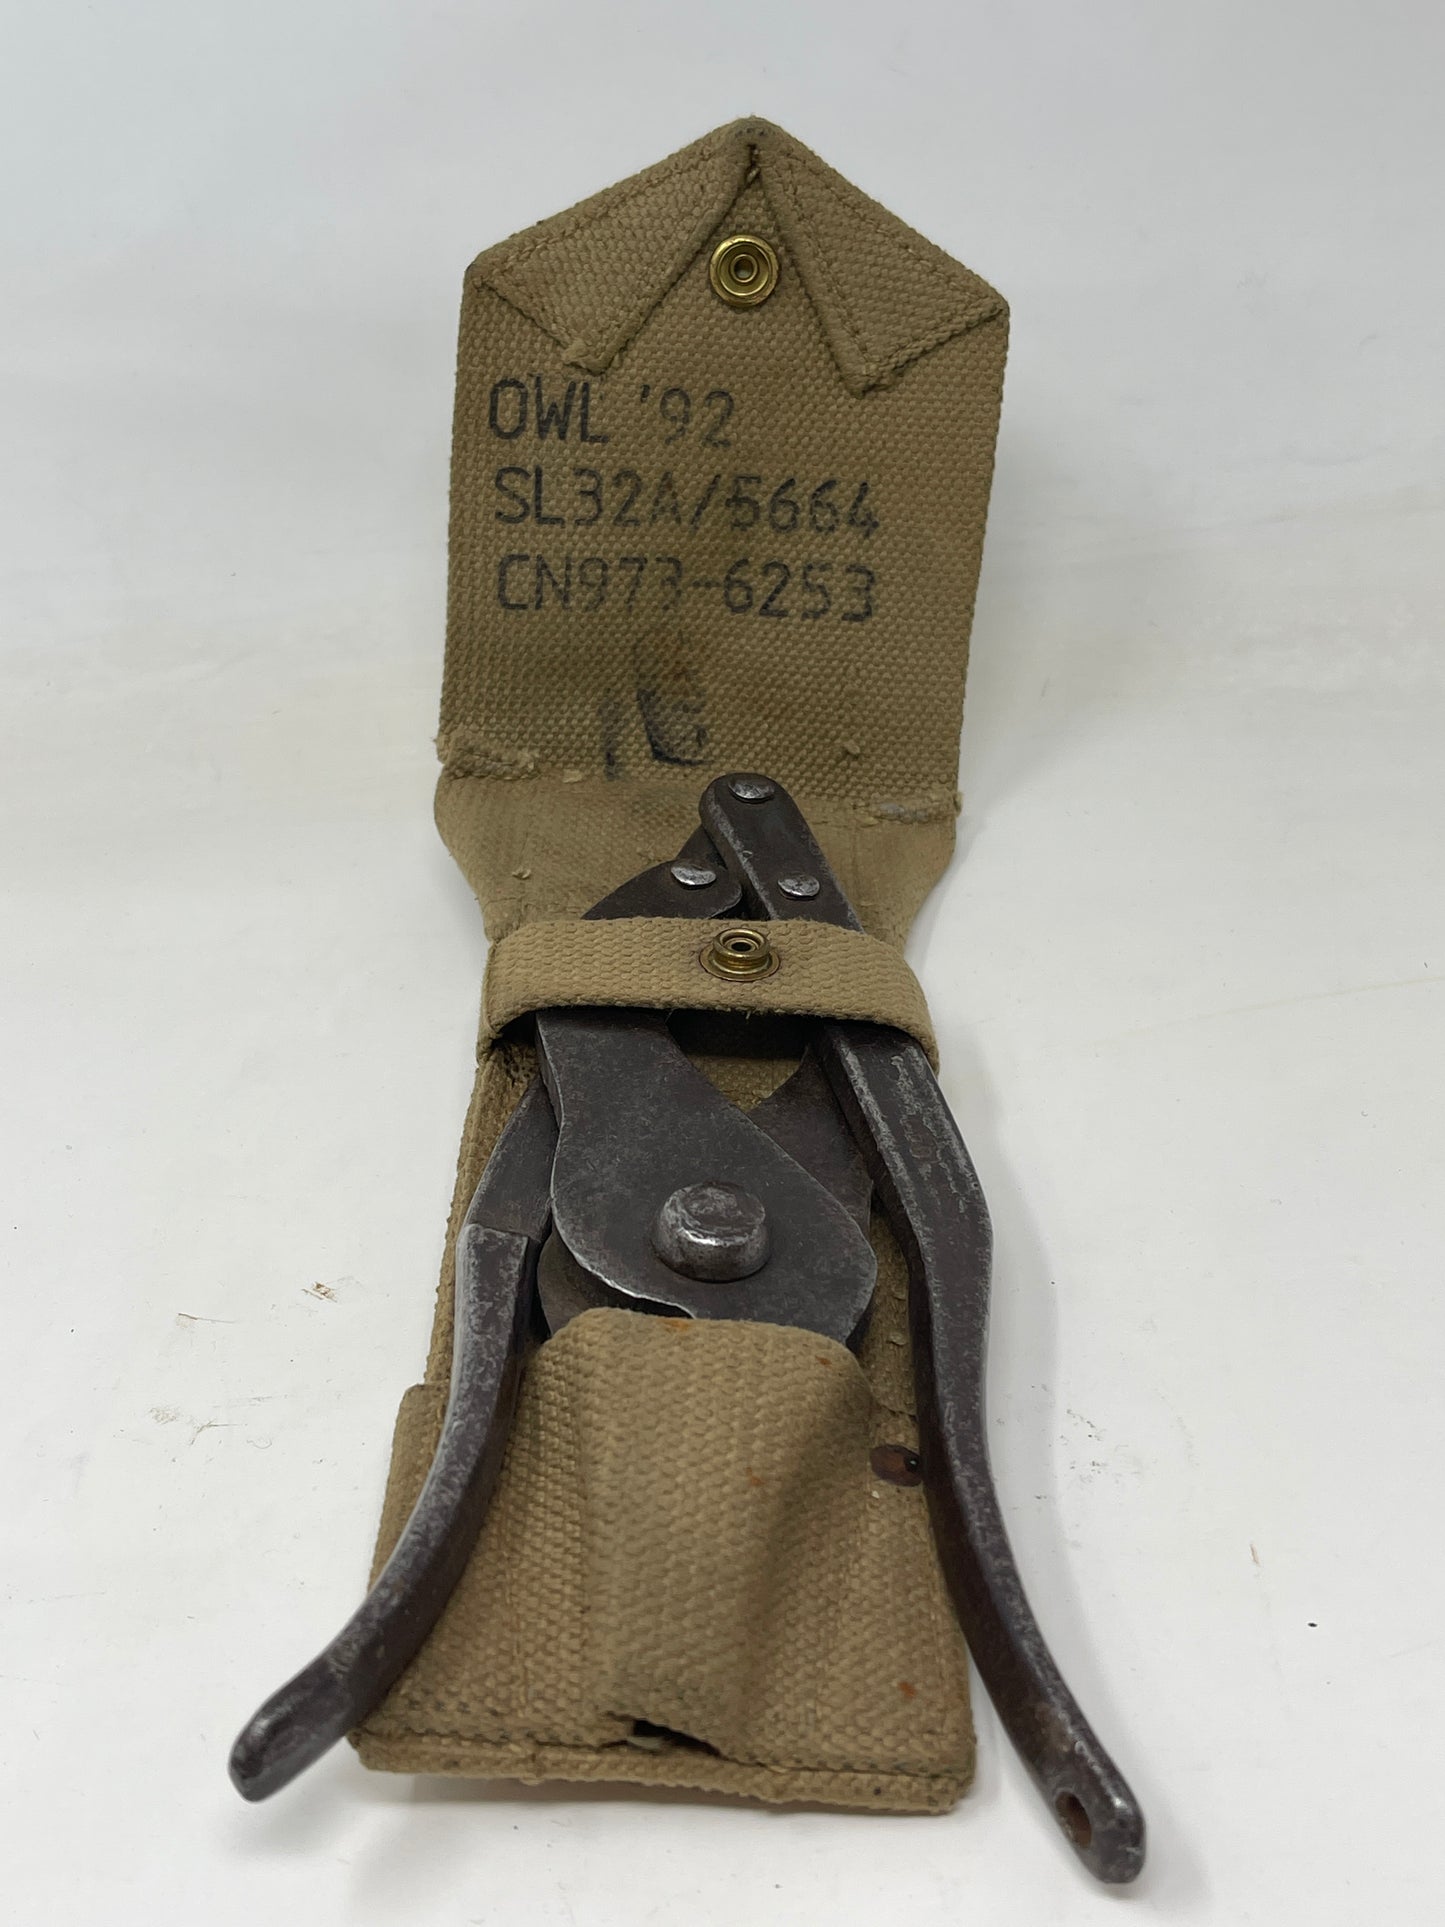 inside view of 37 pattern webbing wire cutter pouch with wire cutters